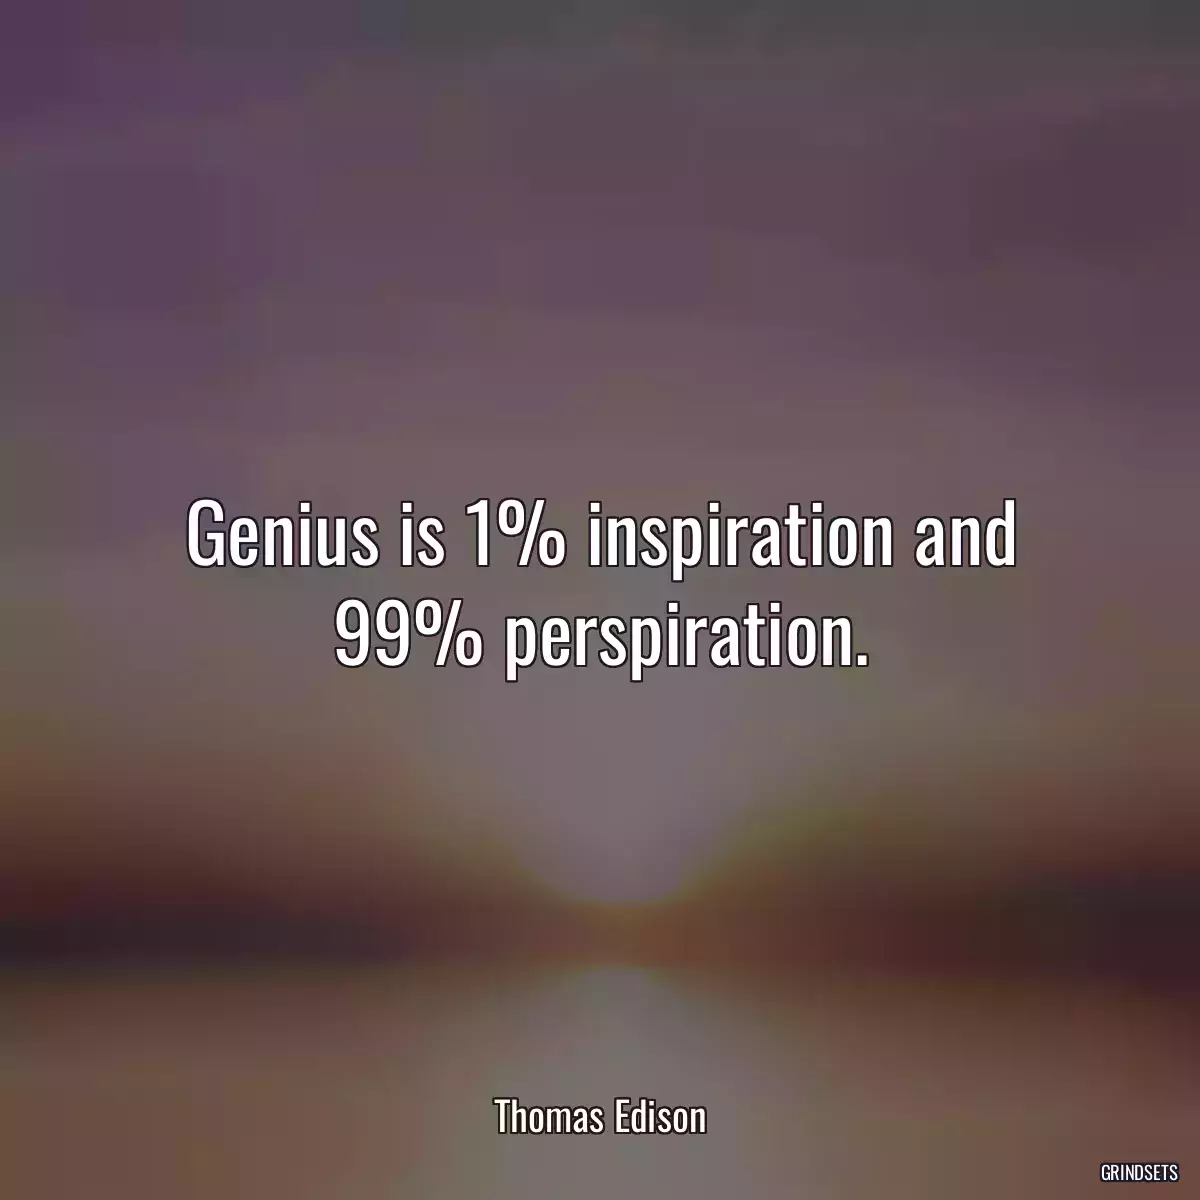 Genius is 1% inspiration and 99% perspiration.